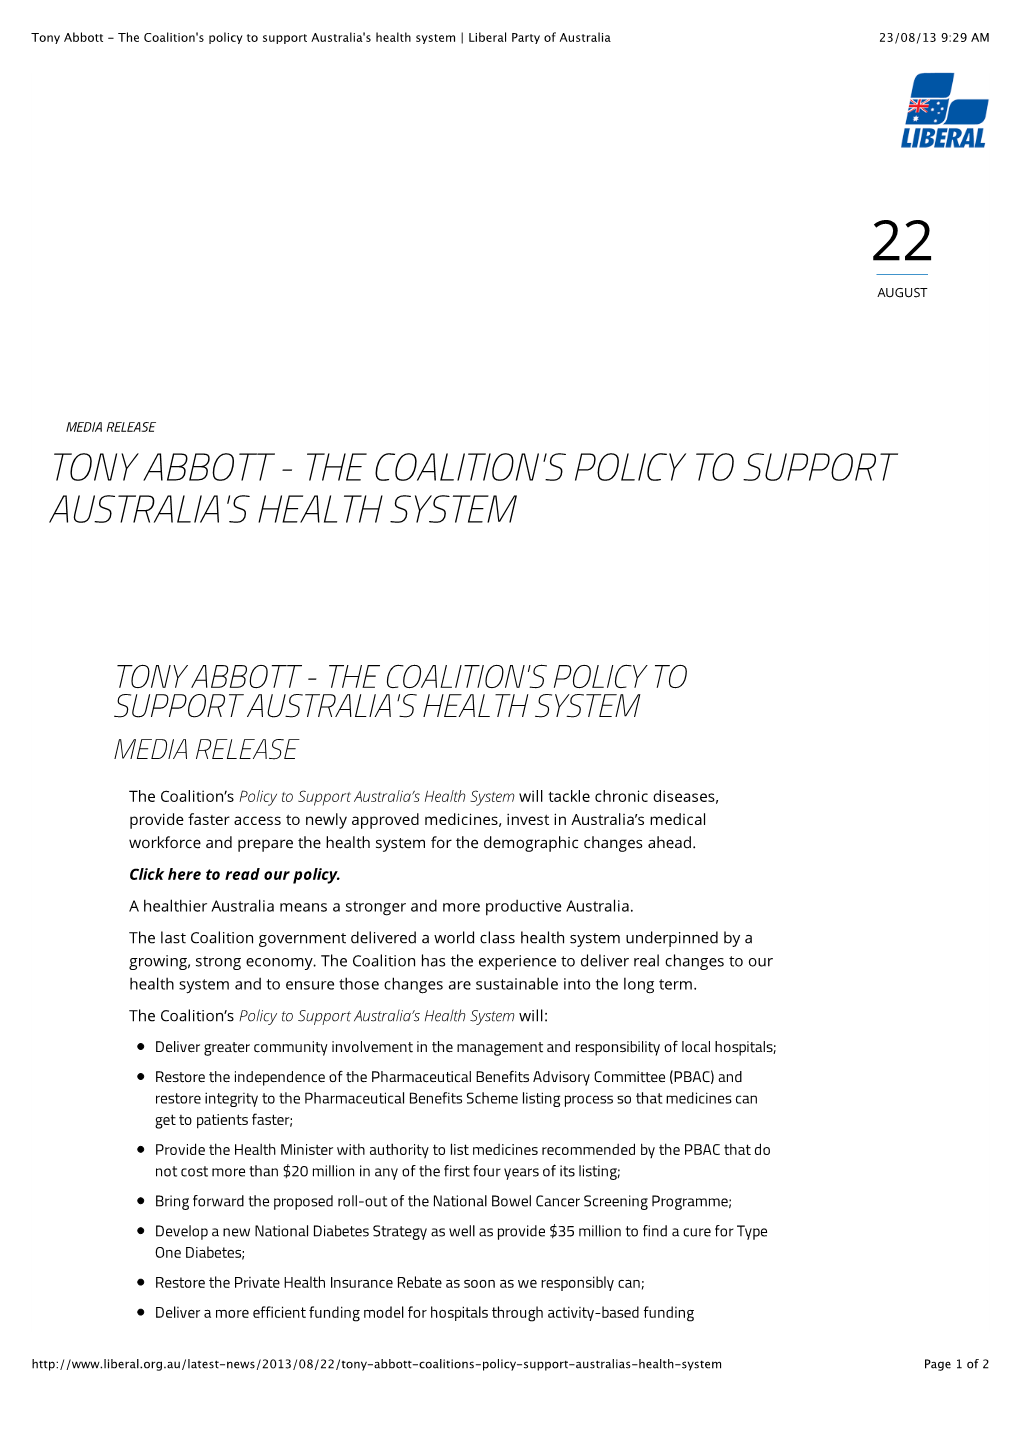 Tony Abbott - the Coalition's Policy to Support Australia's Health System | Liberal Party of Australia 23/08/13 9:29 AM